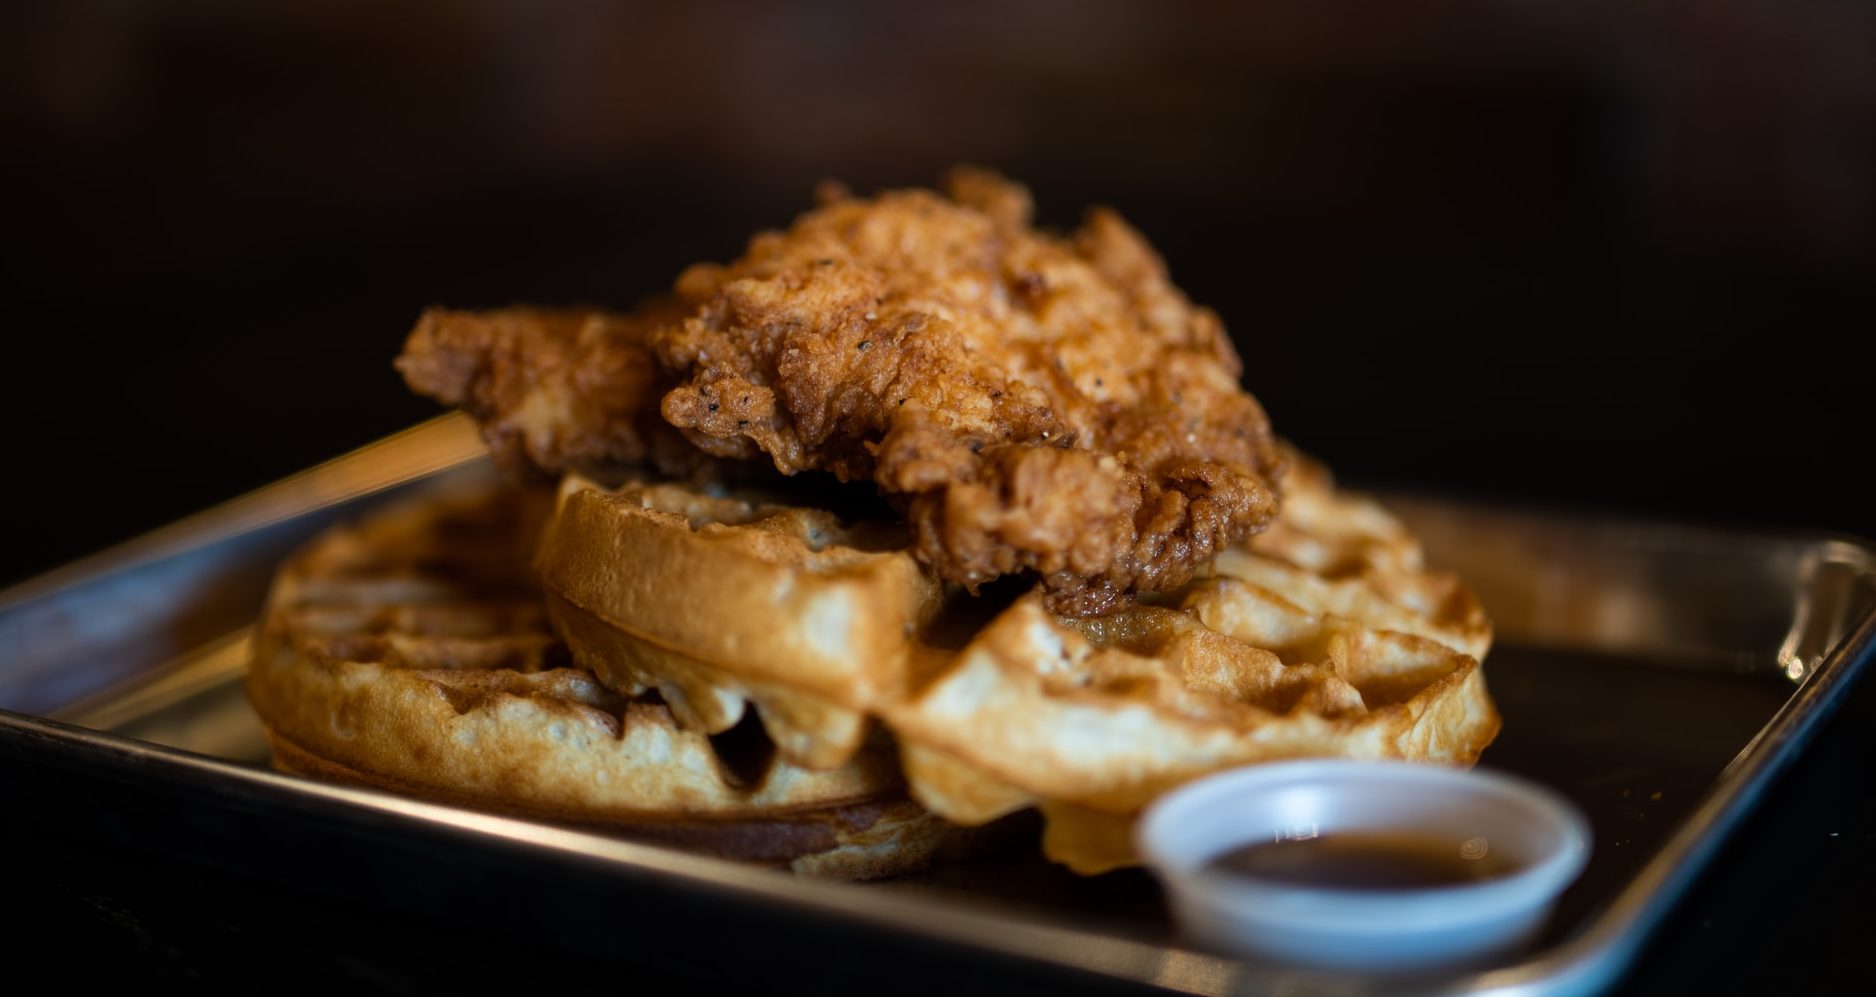 classic Southern dish of chicken and waffles